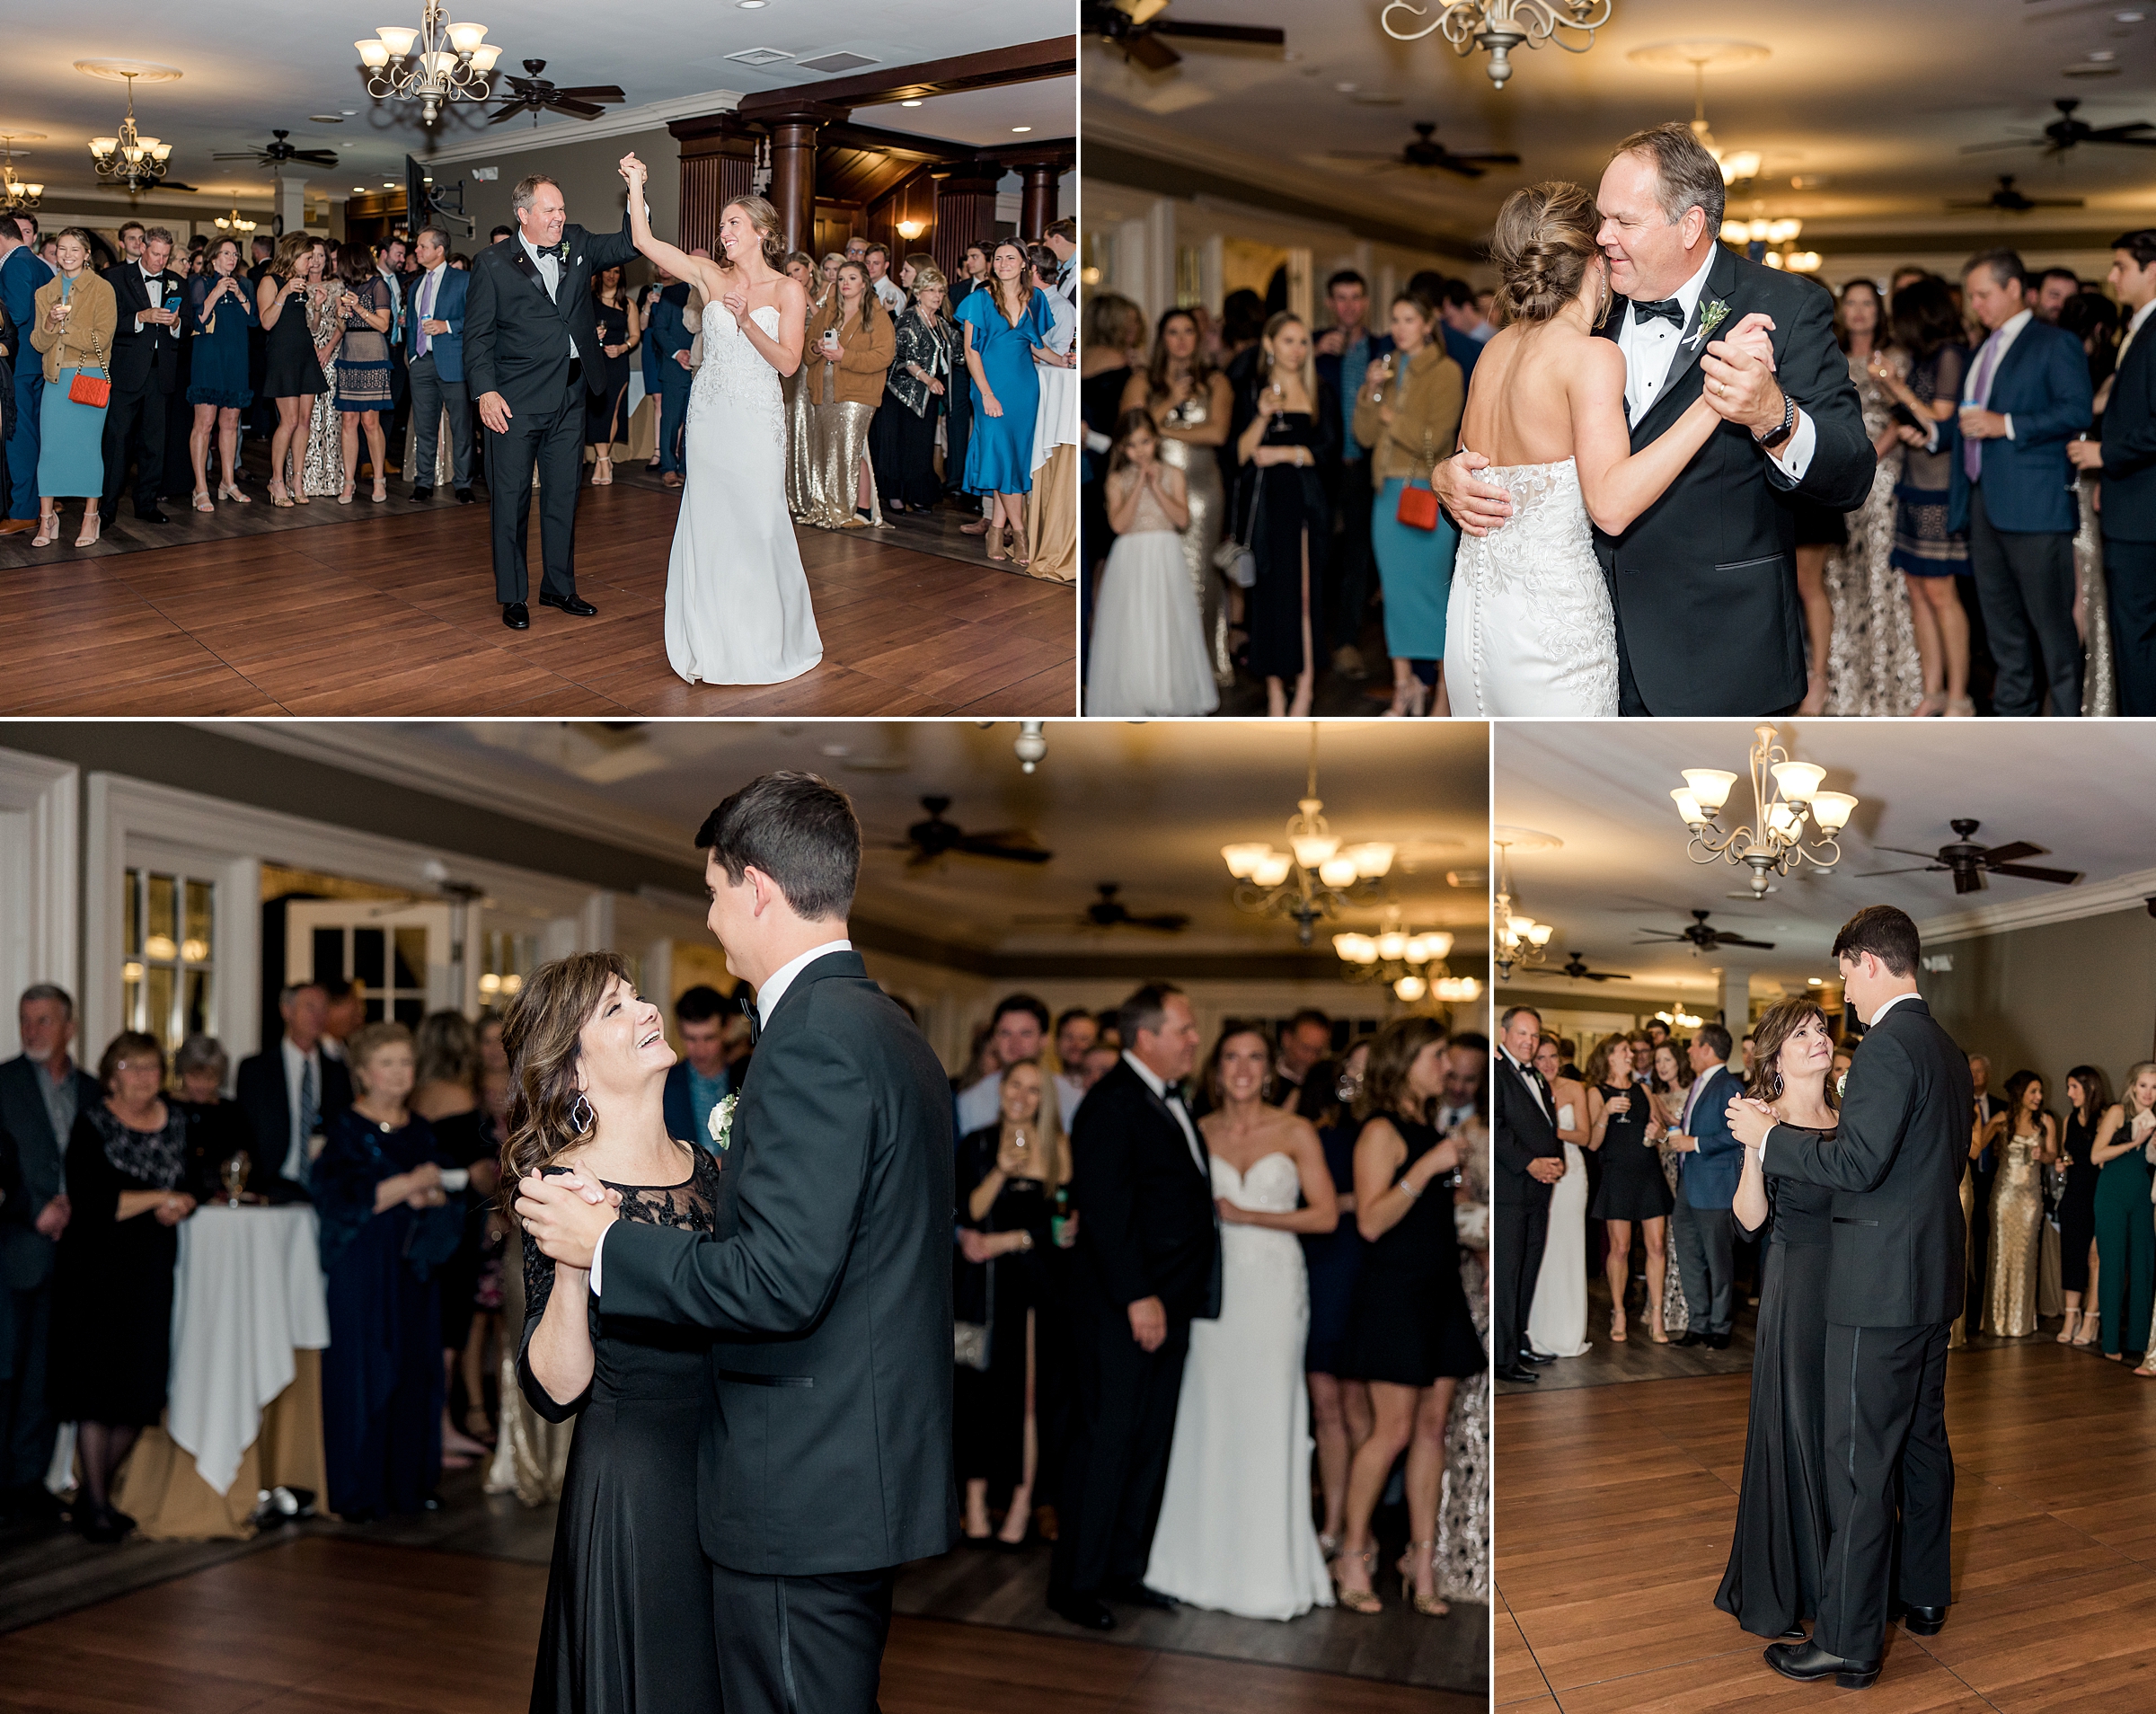 wedding guests celebrate and dance at wedding reception